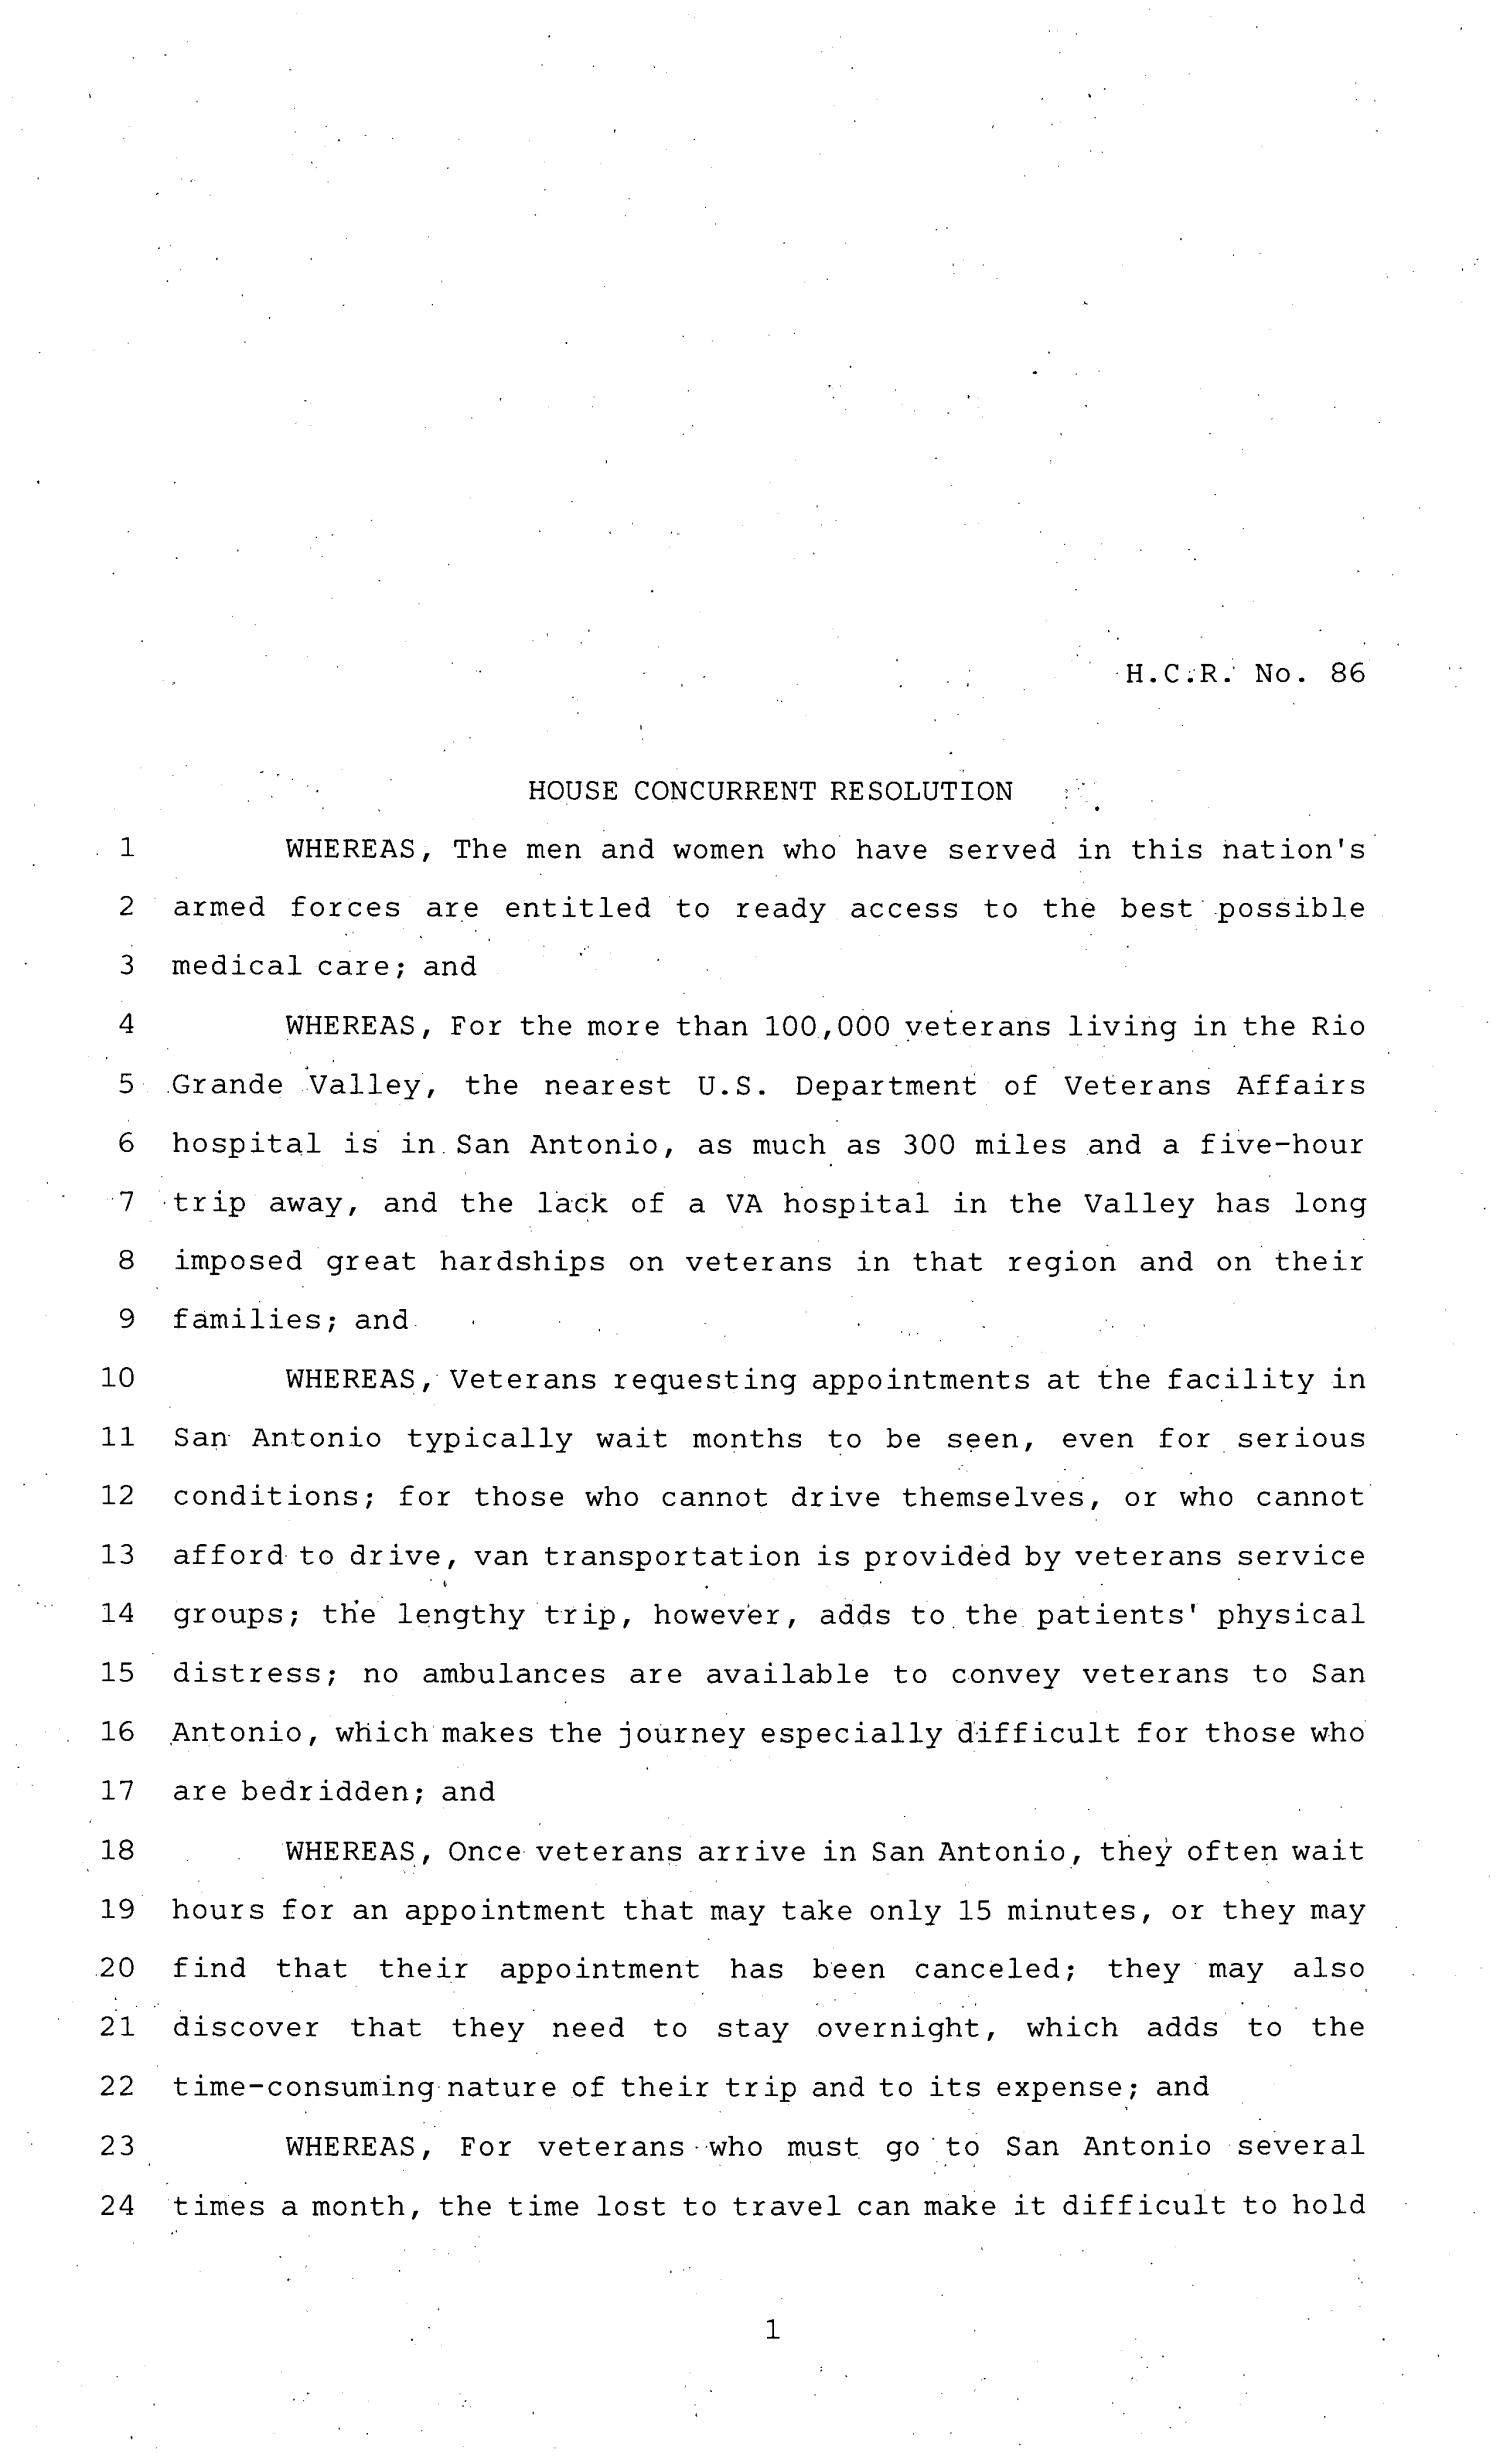 81st Texas Legislature, House Concurrent Resolution, House Bill 86
                                                
                                                    [Sequence #]: 1 of 4
                                                